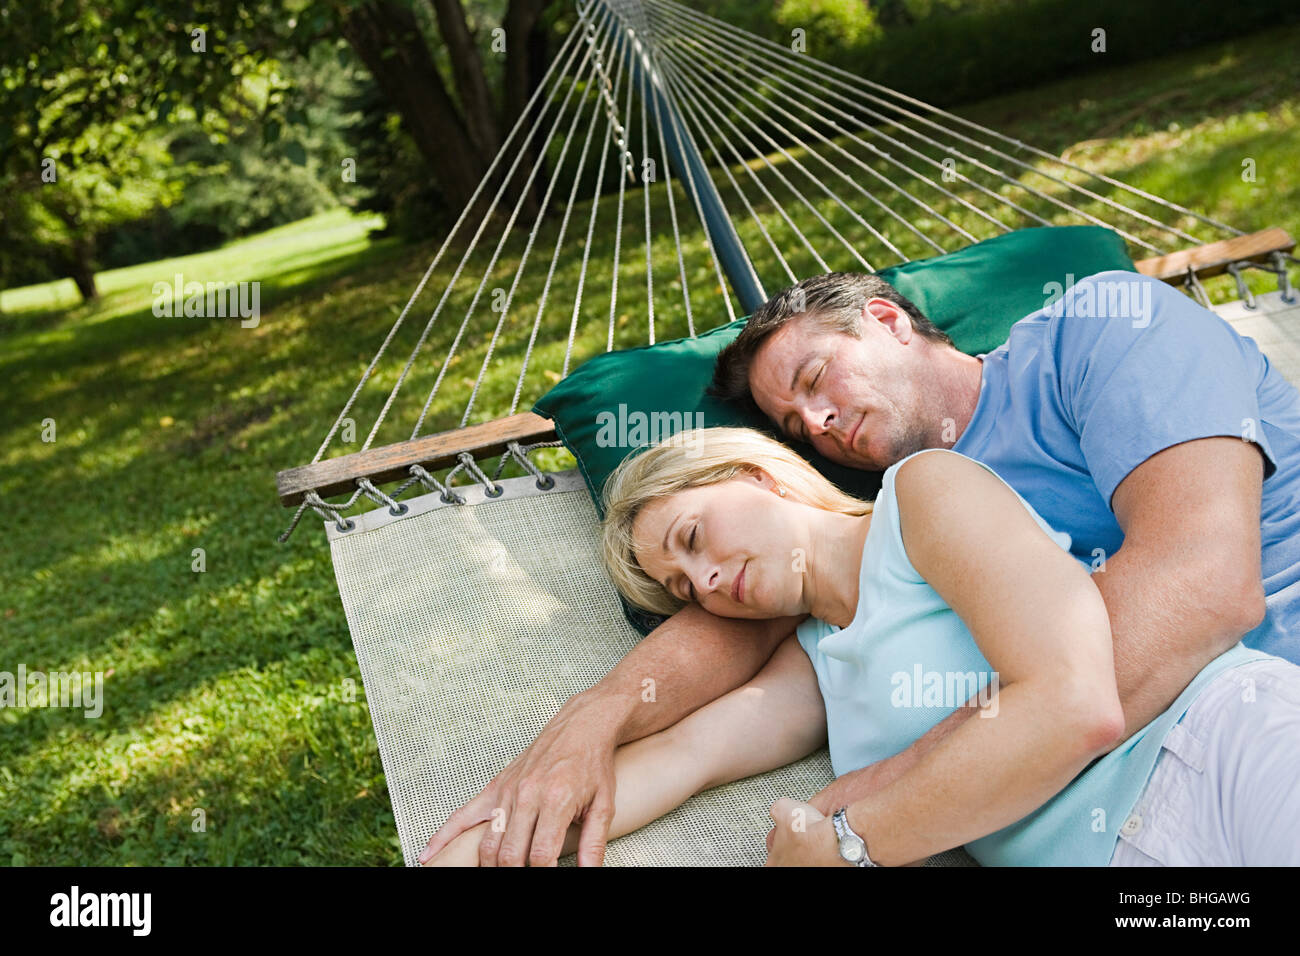 Couple lying in hammock Banque D'Images